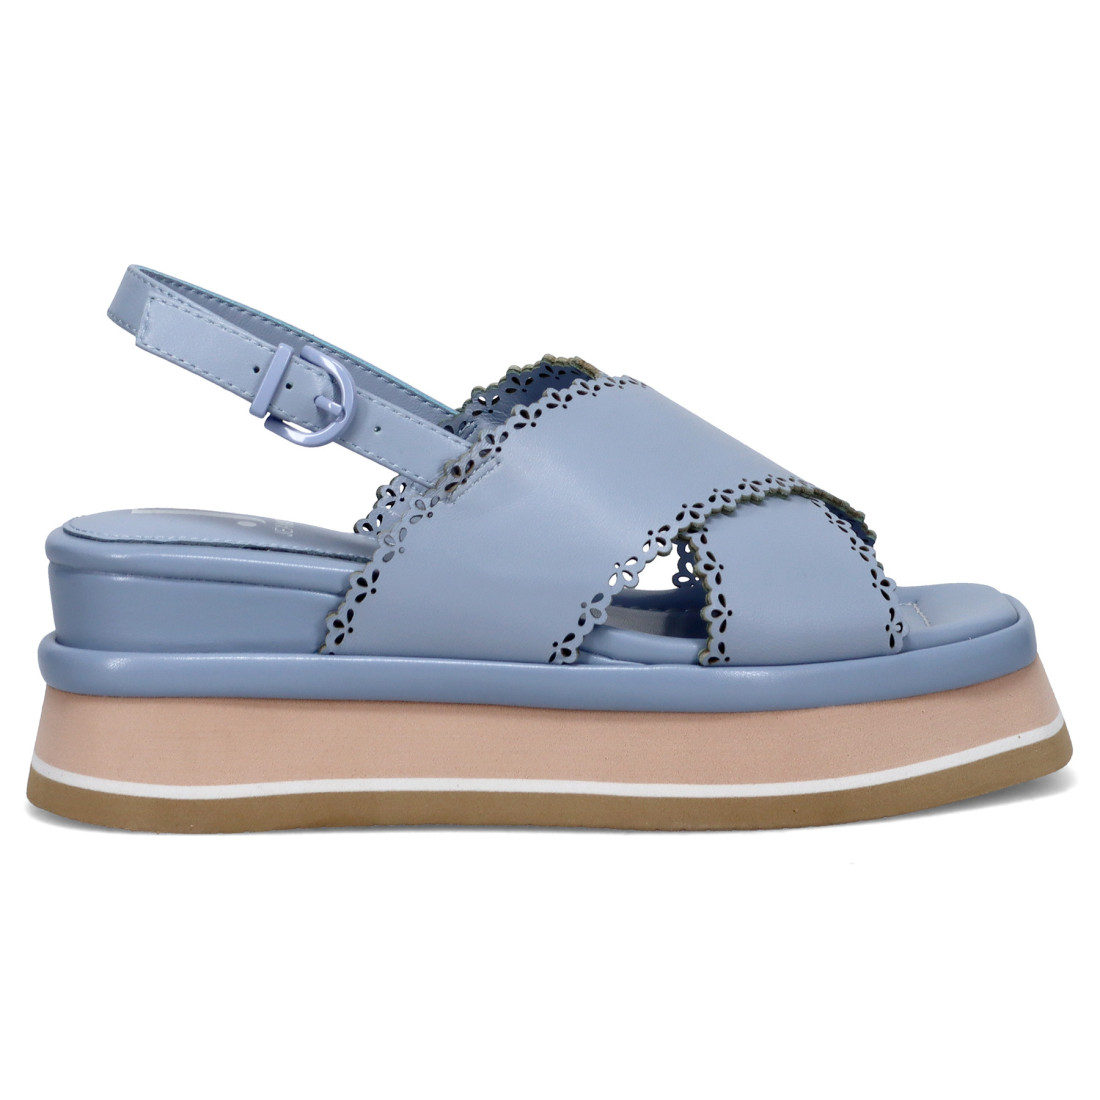 Jeannot wedge sandal in light blue lasered leather